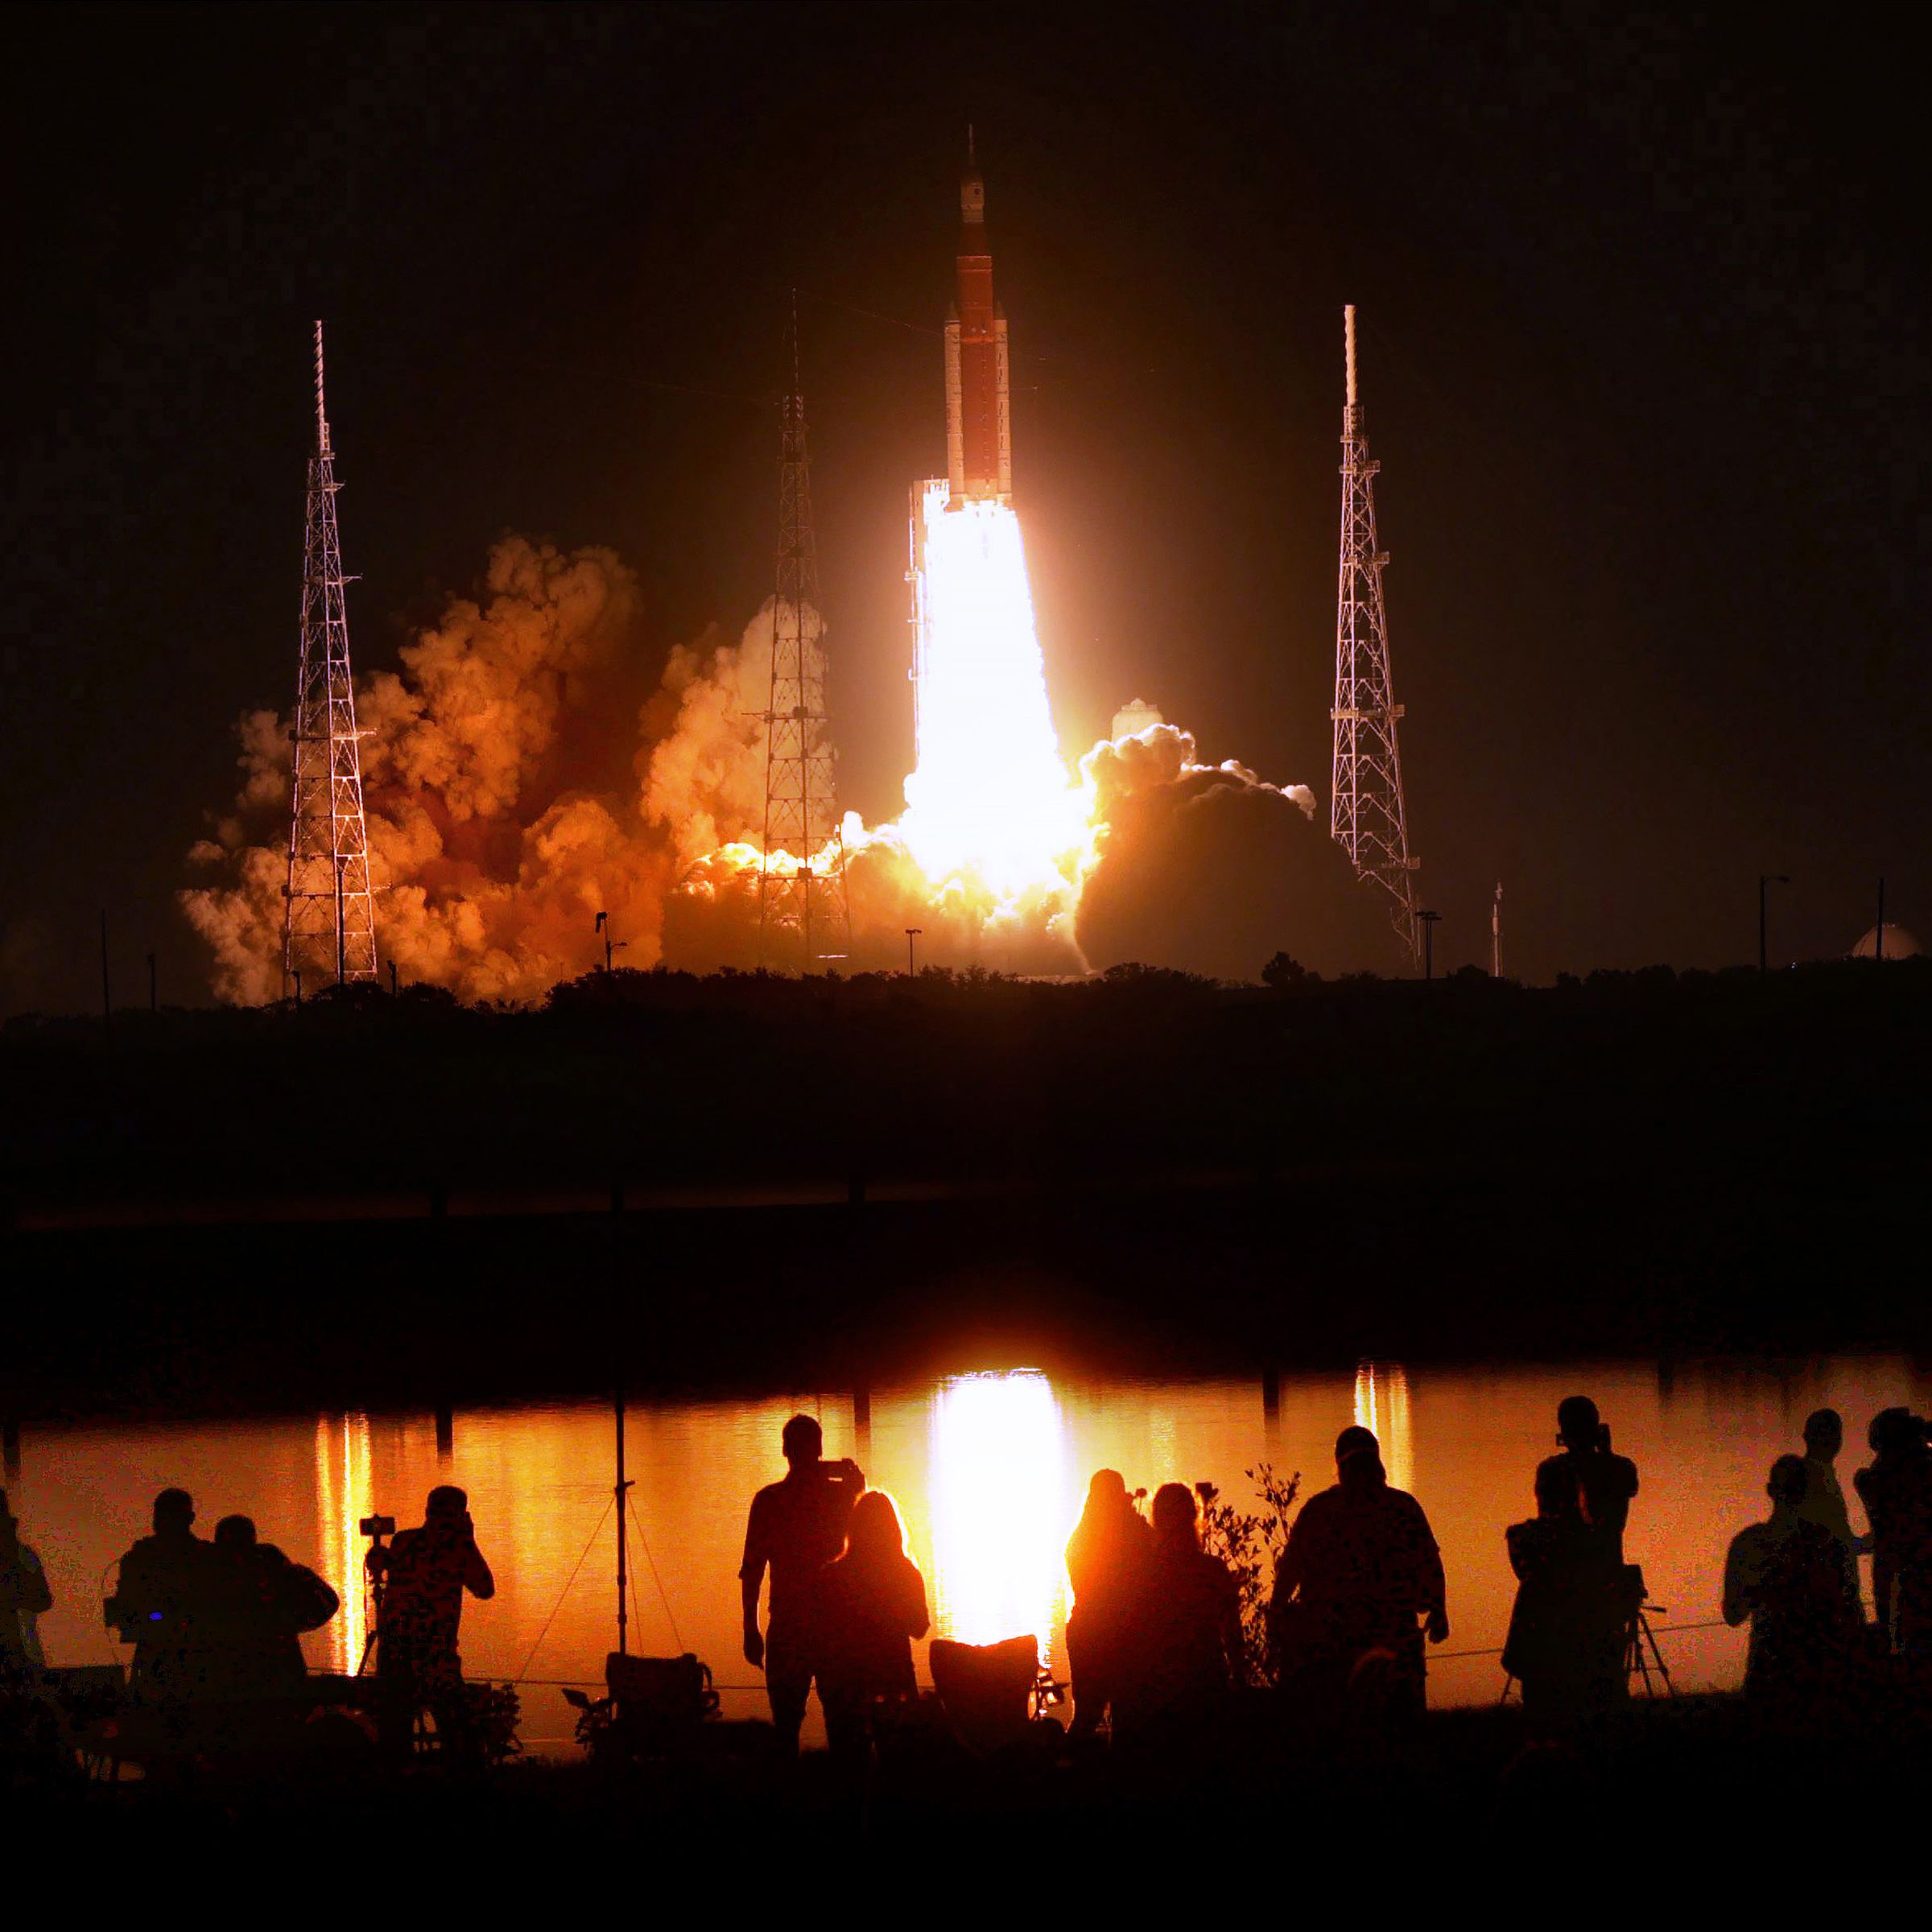 A row of people stand silhouetted against the orange glow of a distant rocket launch.